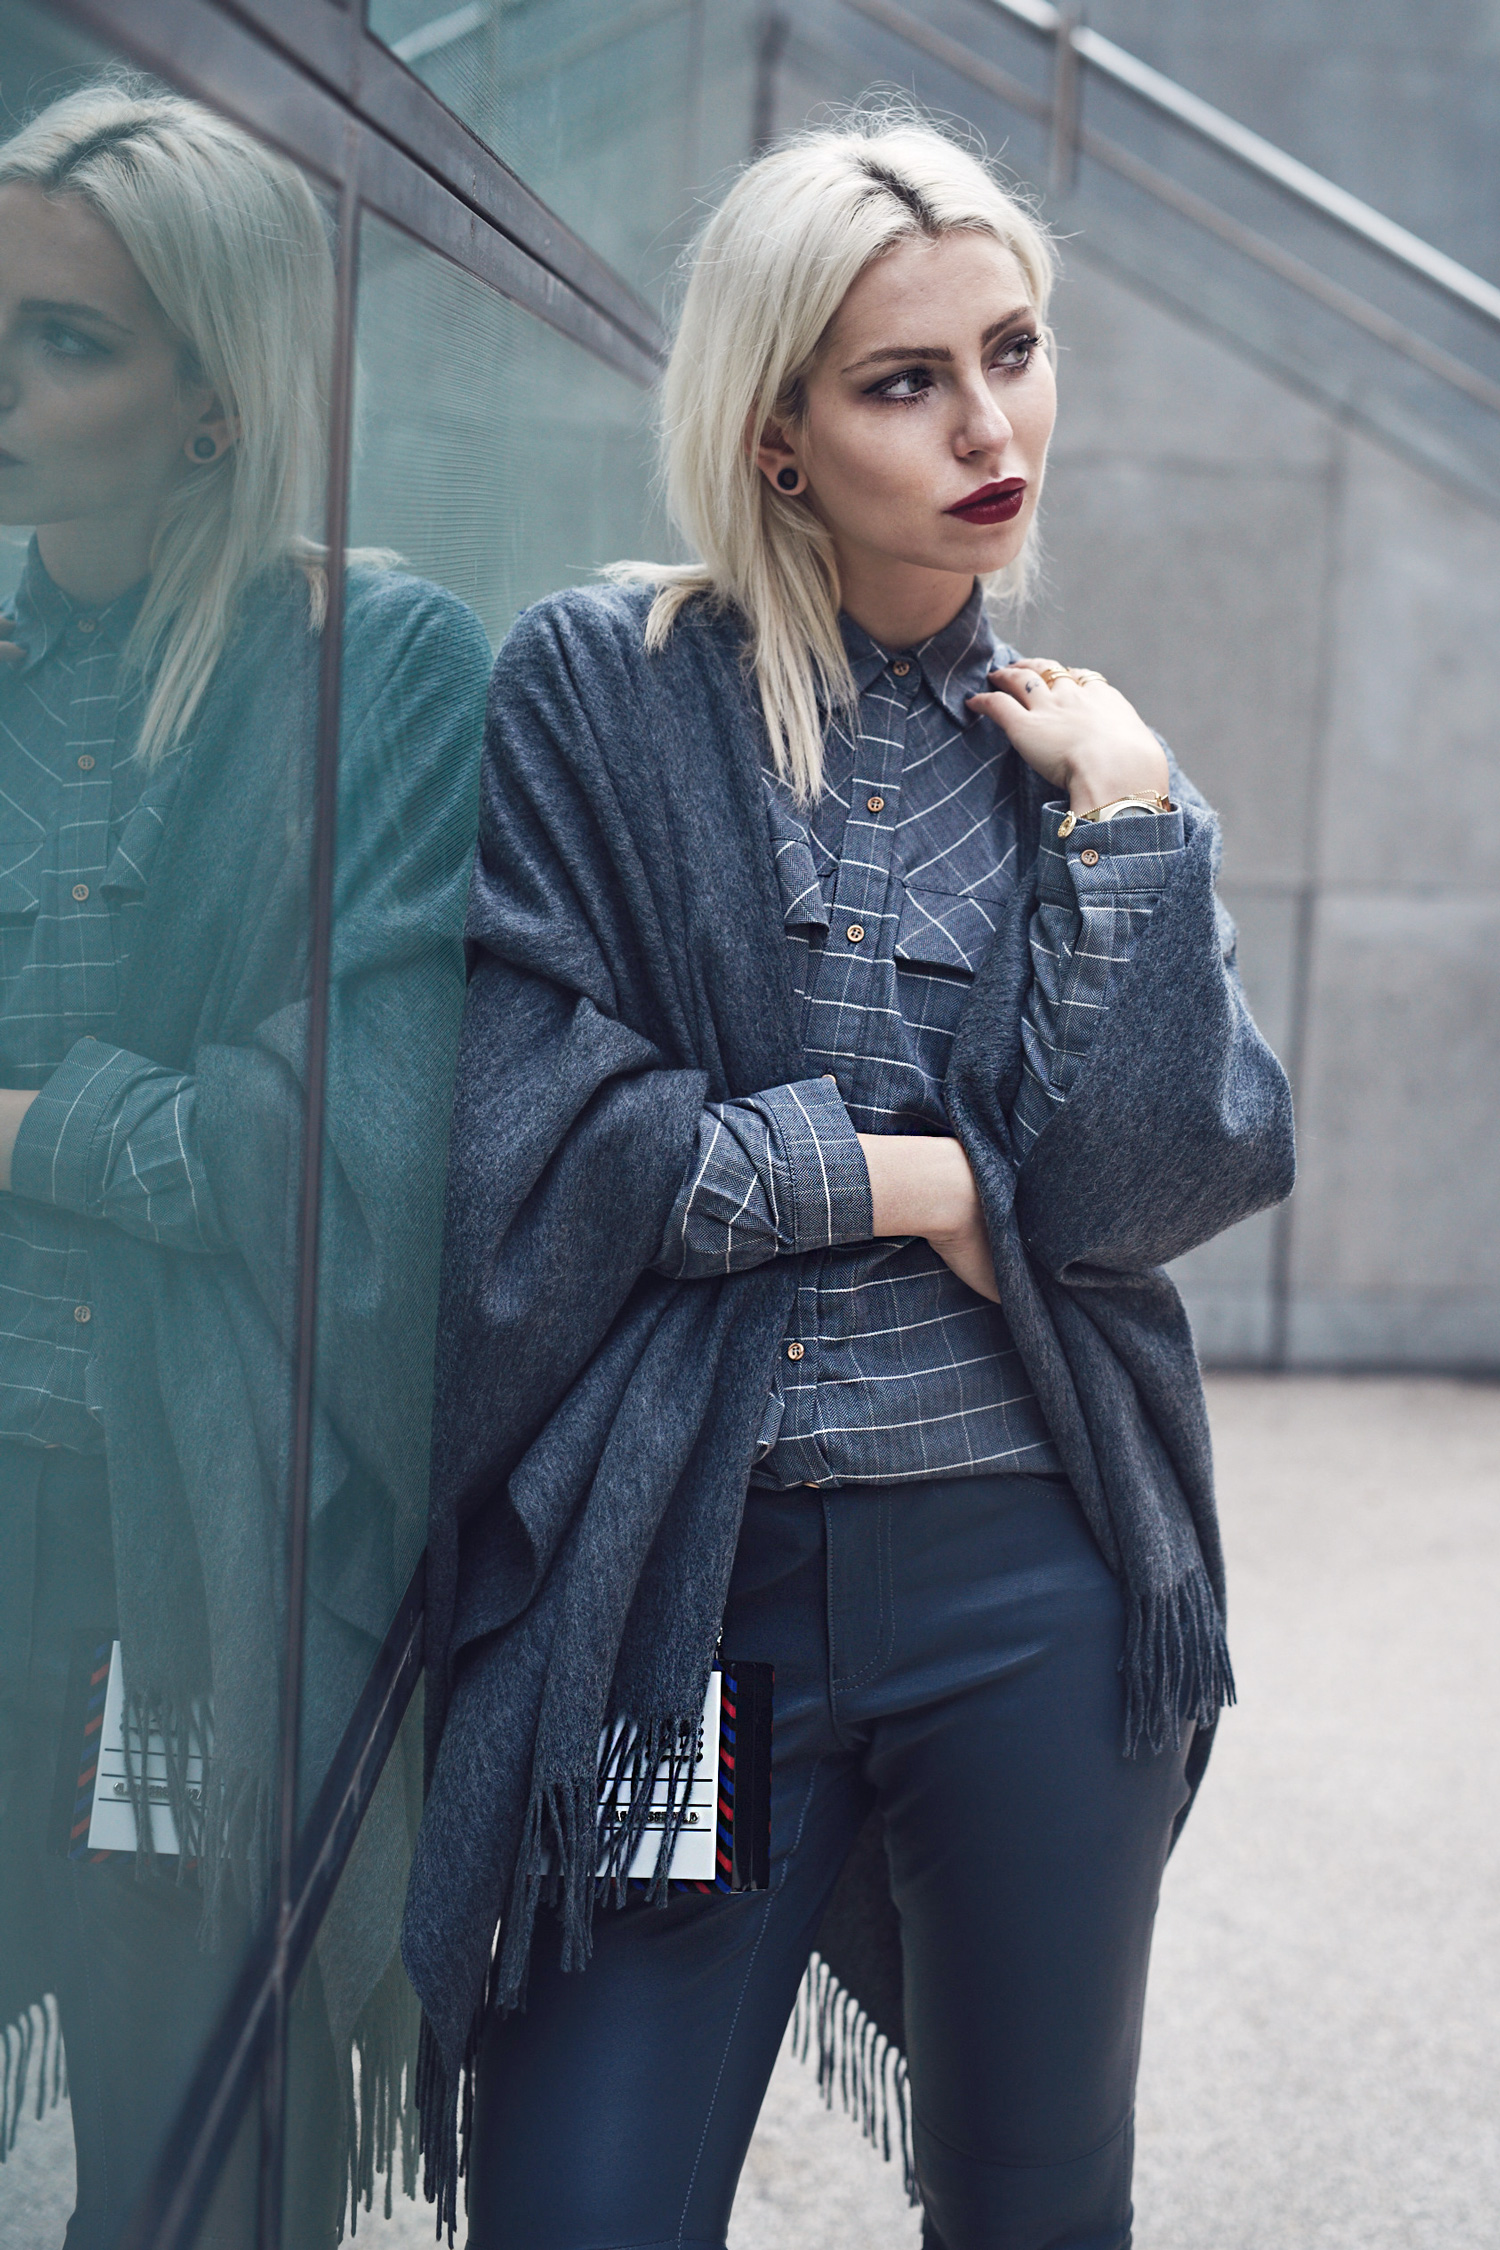 more details on my blog | grey outfit | fashion blogger from Berlin | featuring Karl Lagerfeld, Riani, Converse